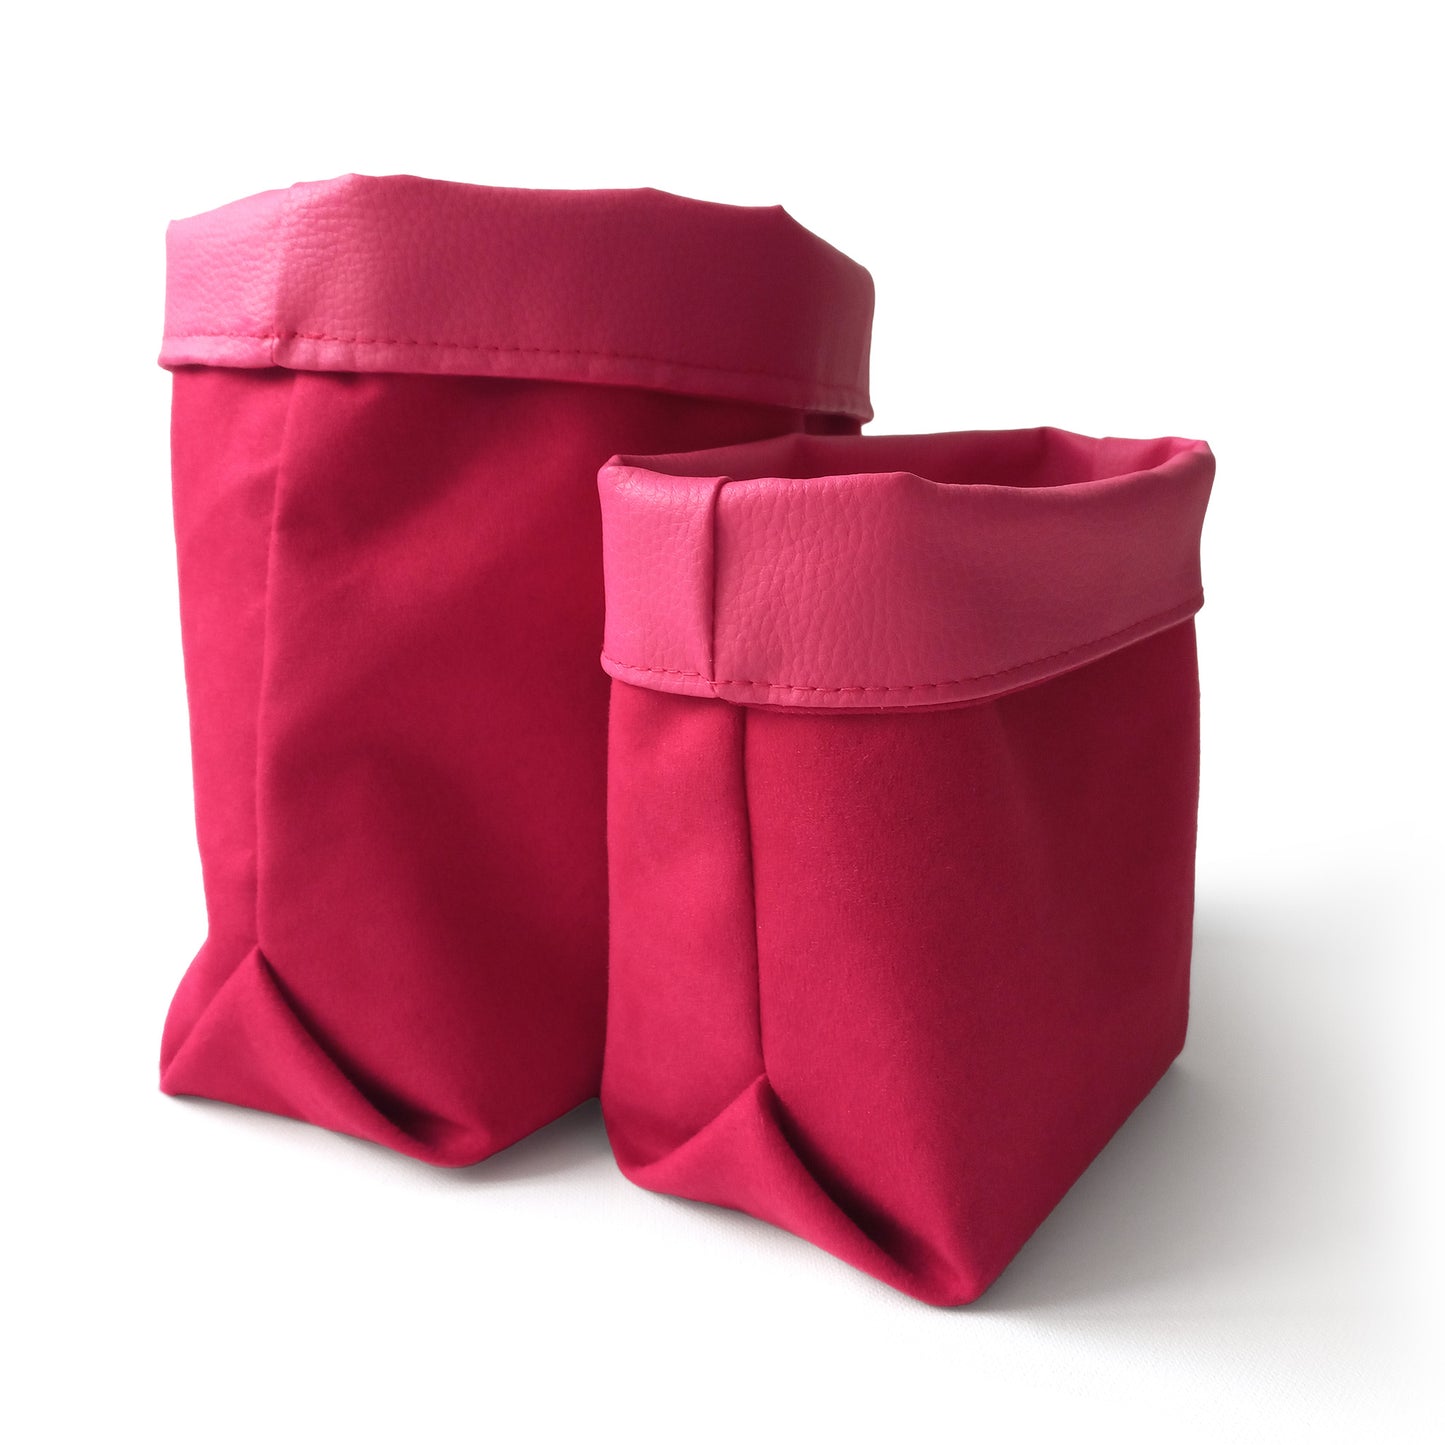 Two red fabric baskets